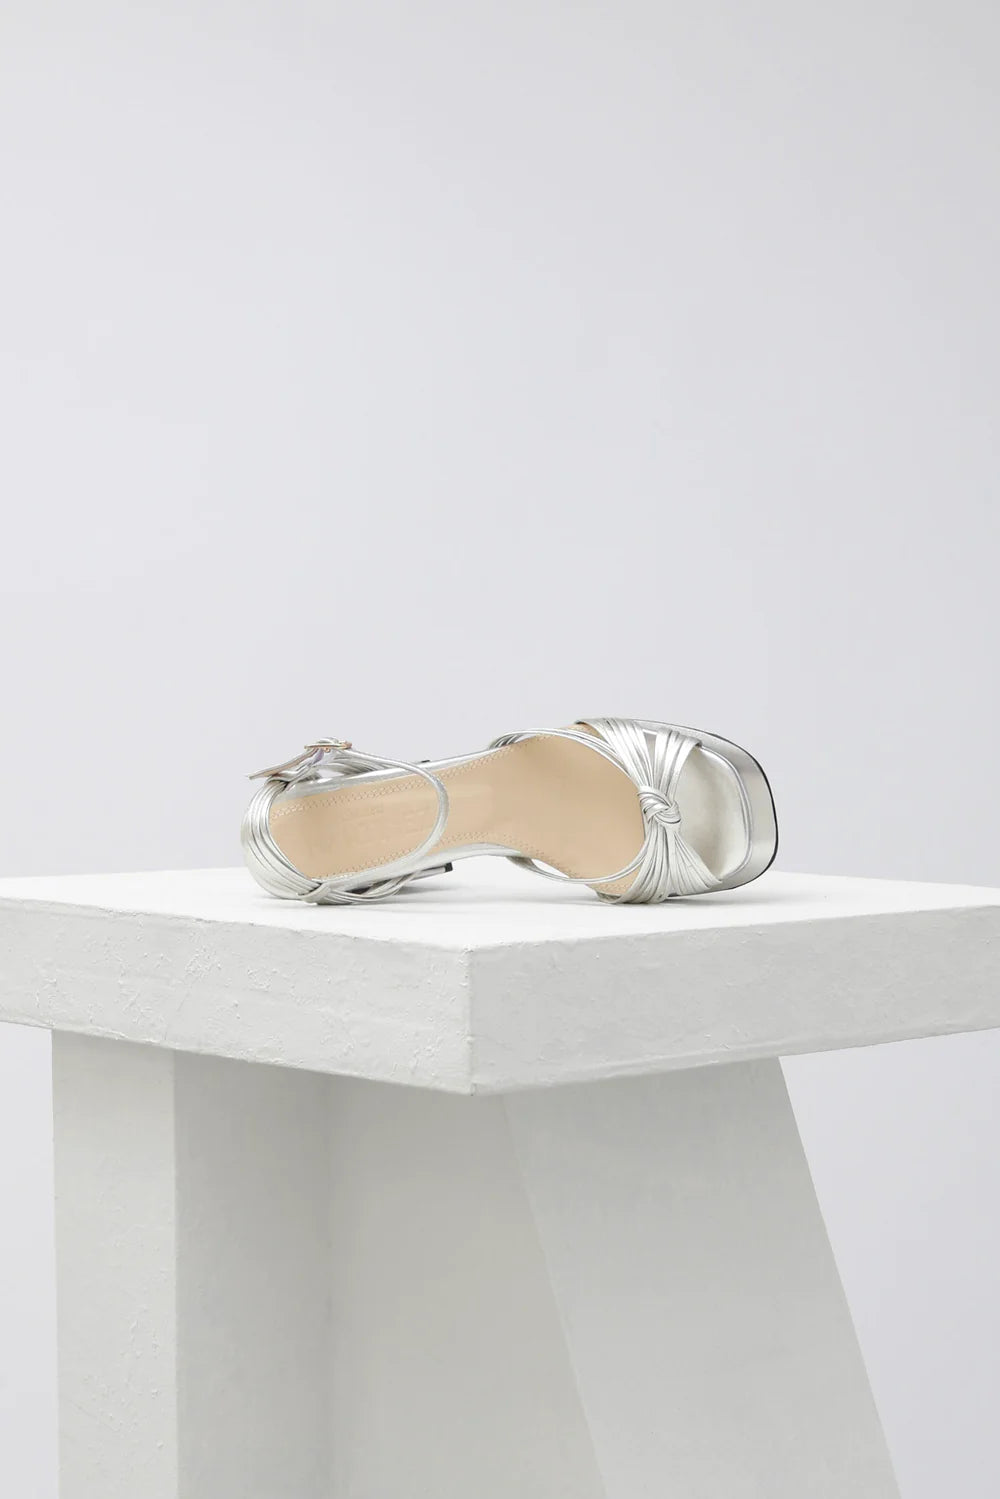 Souliers Martinez - Springs Sandal: Silver Woven Leather